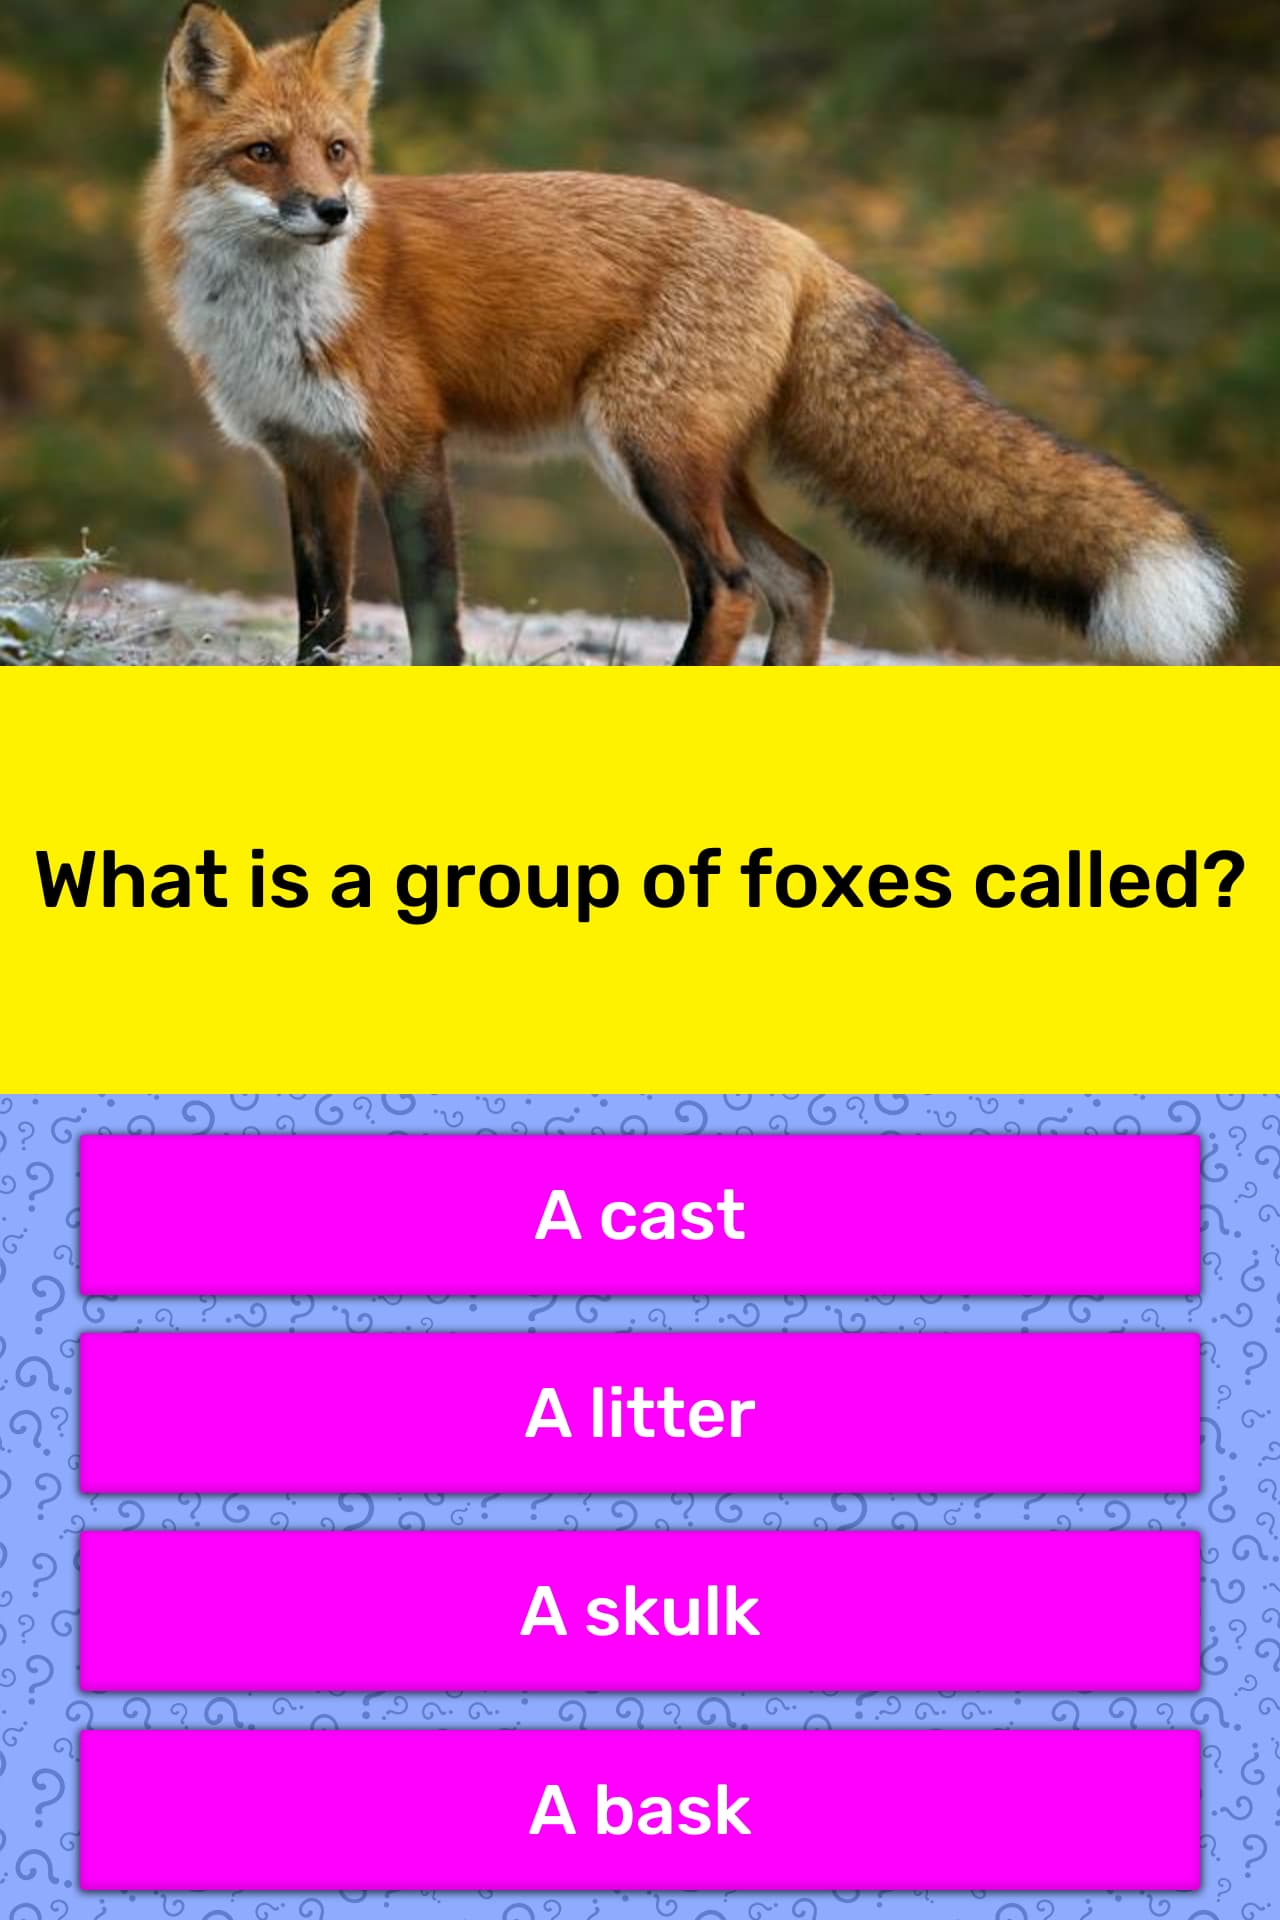 What is 2 foxes called?